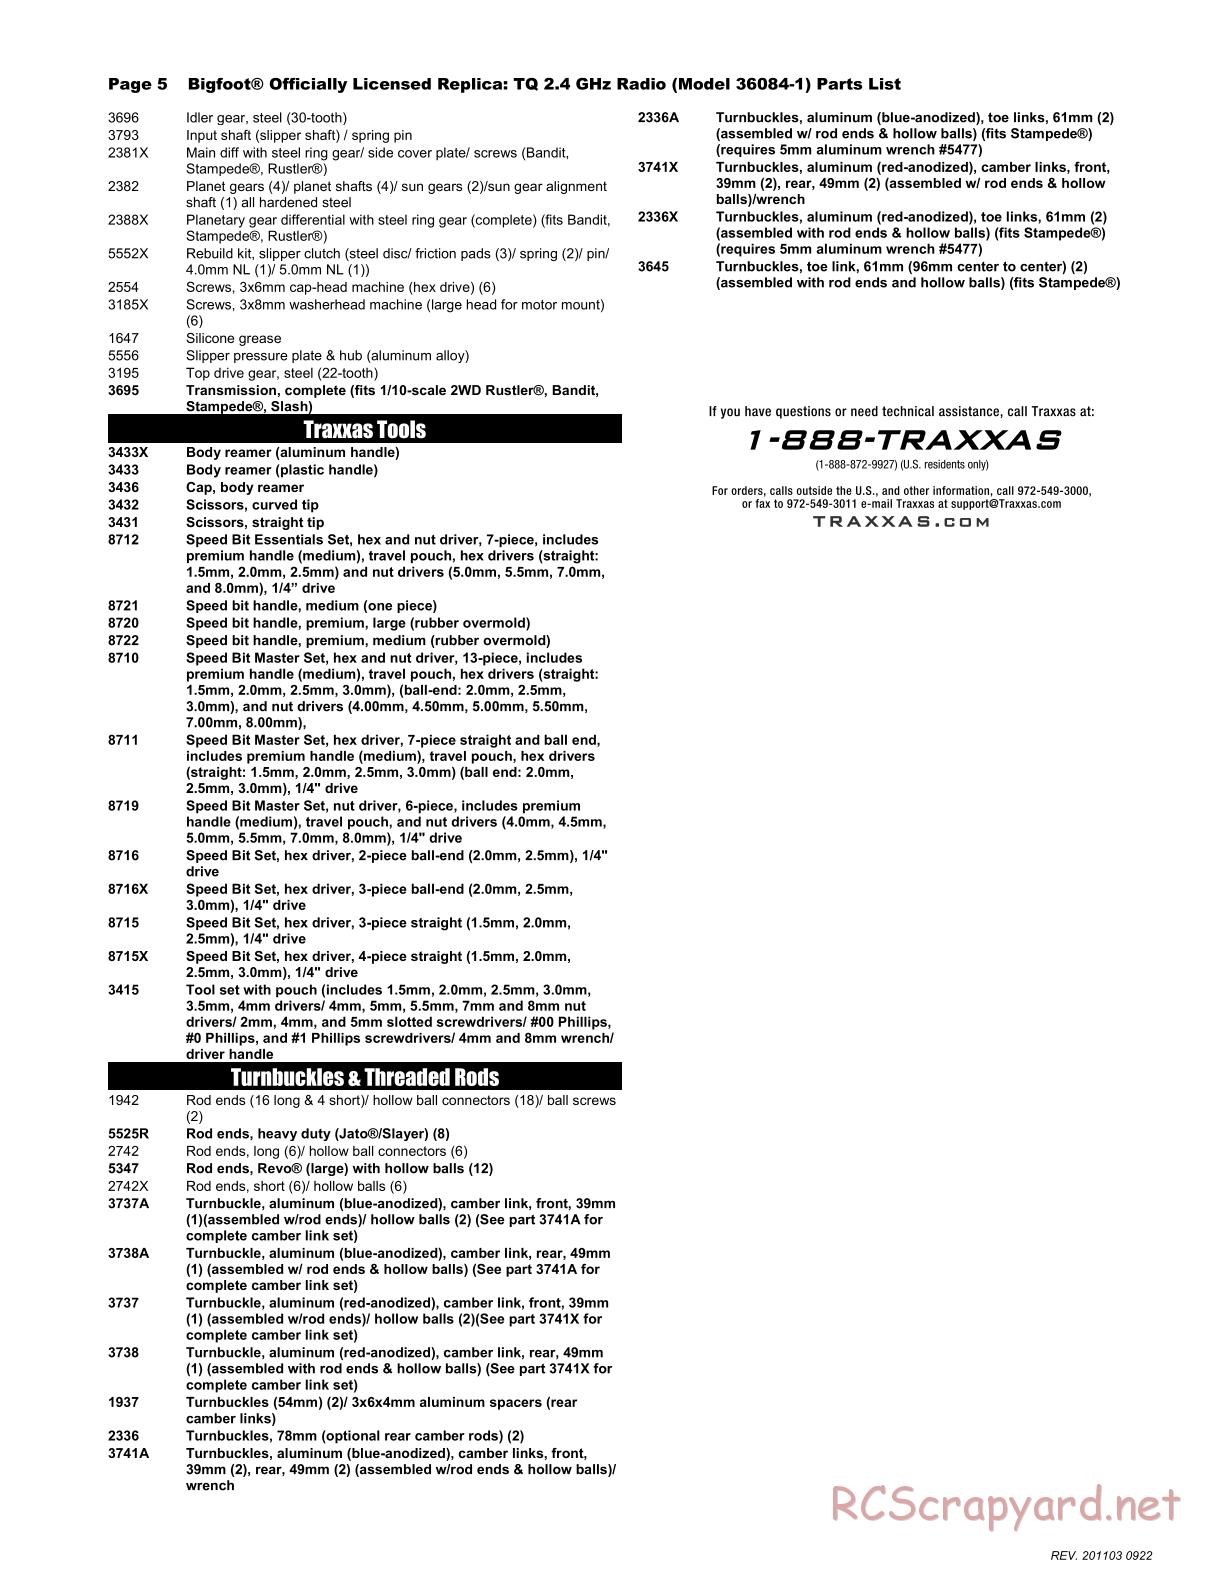 Traxxas - Bigfoot - Parts List - Page 5